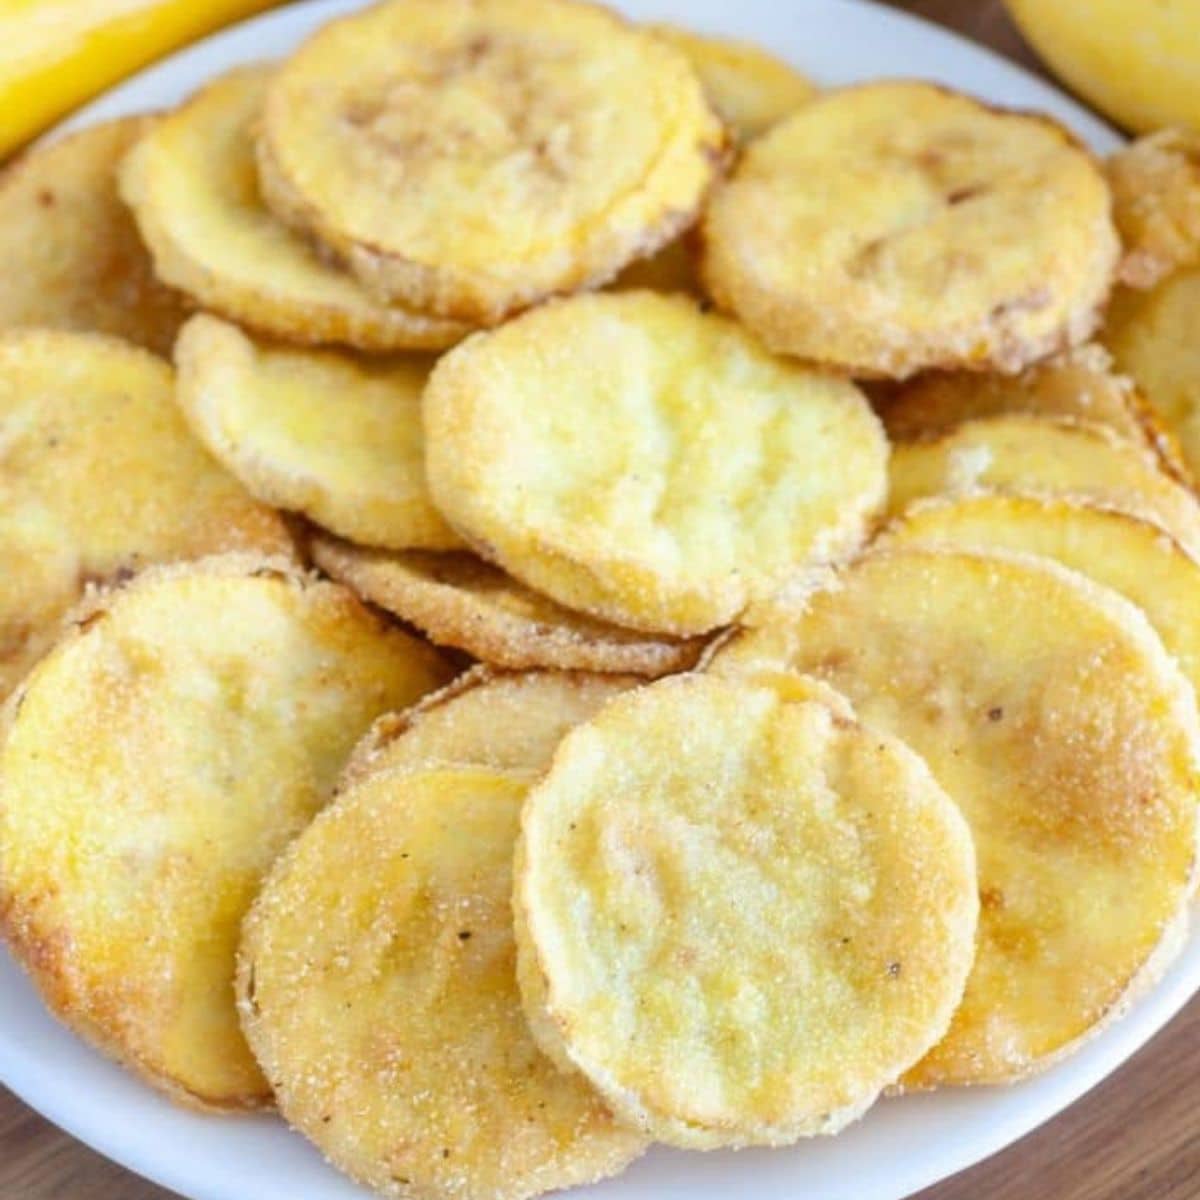 Fried squash on a plate.